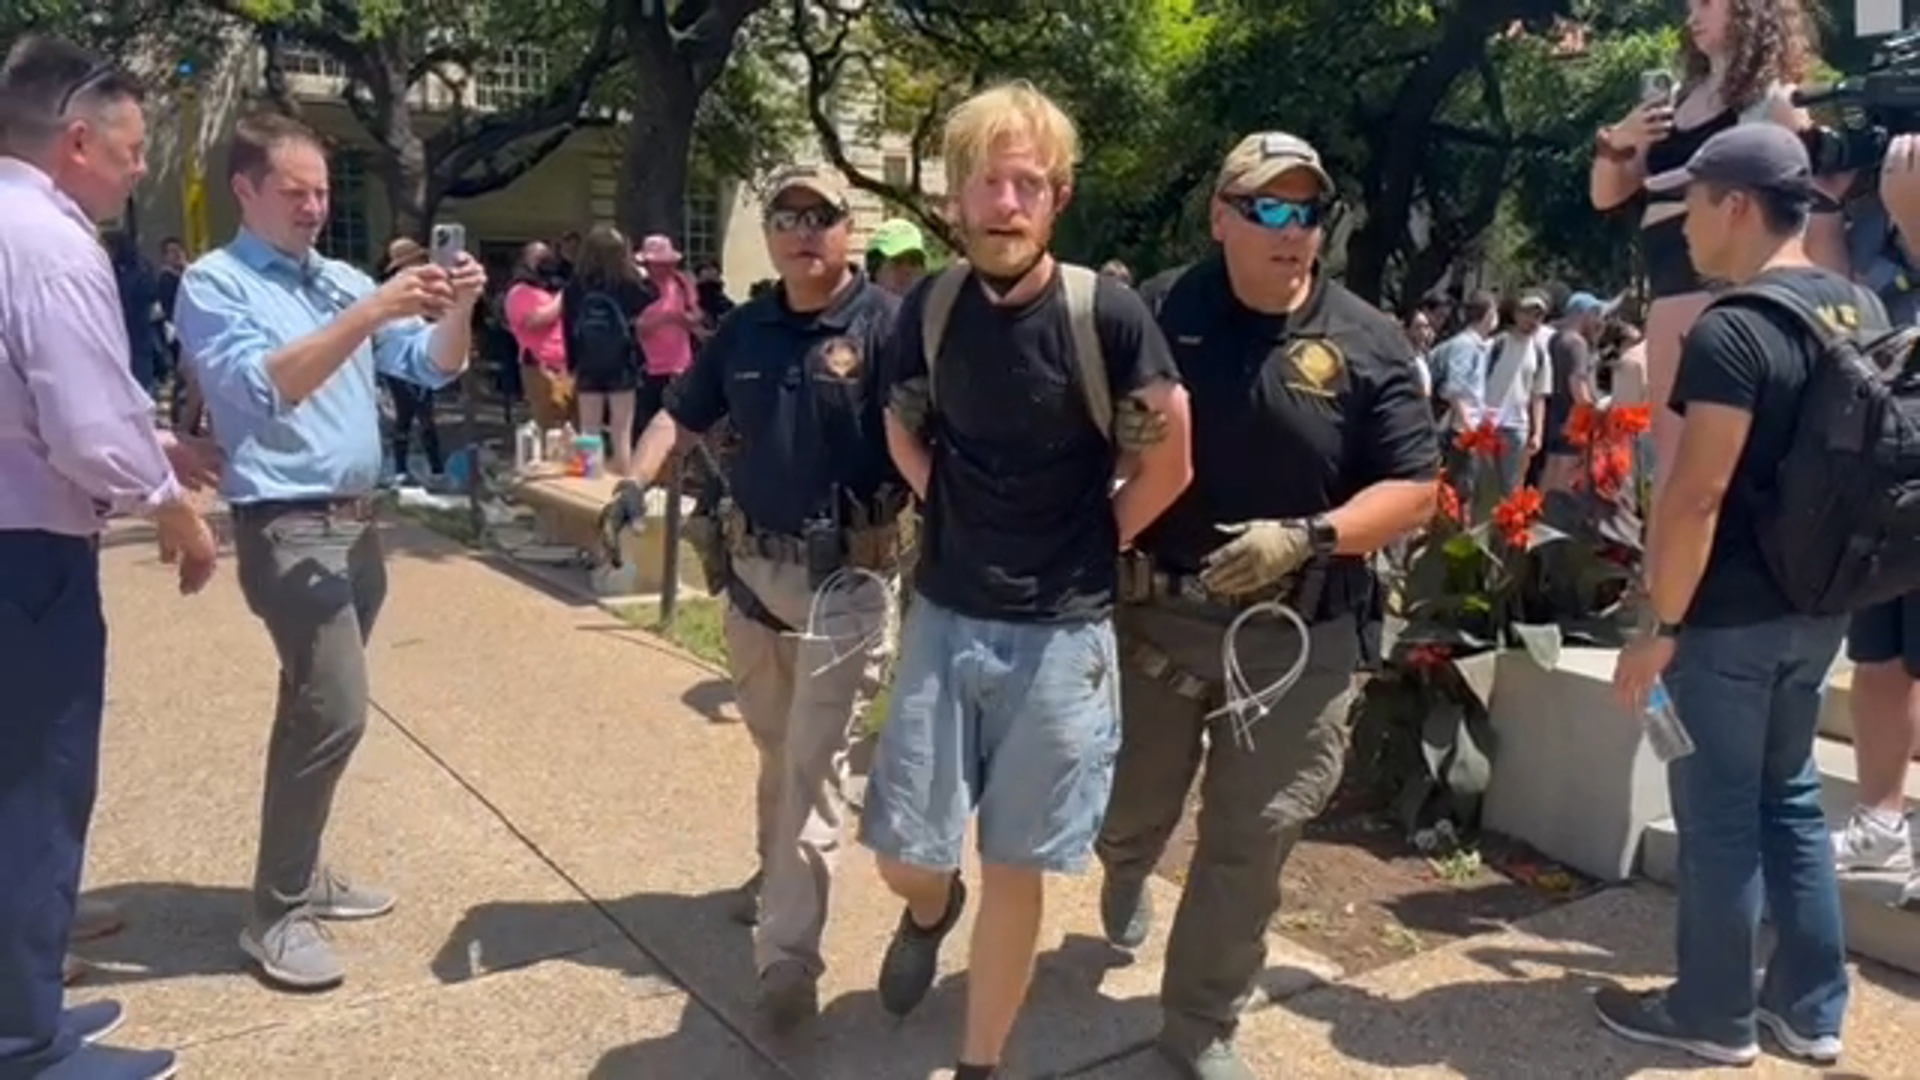 A rally focused on recent DEI layoffs at UT Austin descended into chaos on Monday.